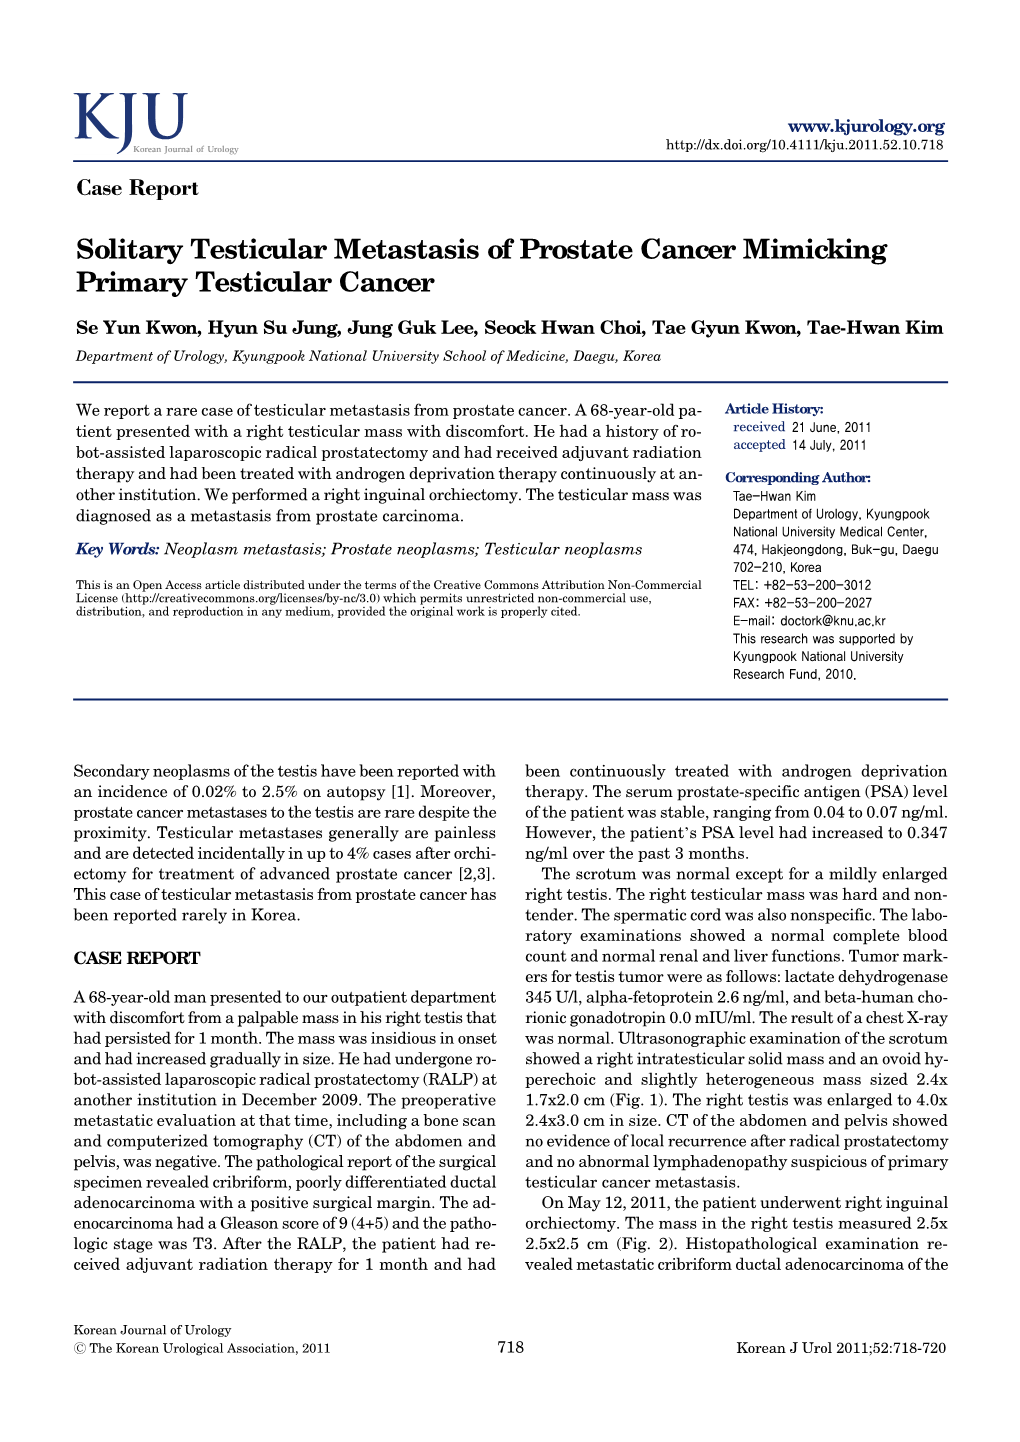 Solitary Testicular Metastasis of Prostate Cancer Mimicking Primary Testicular Cancer